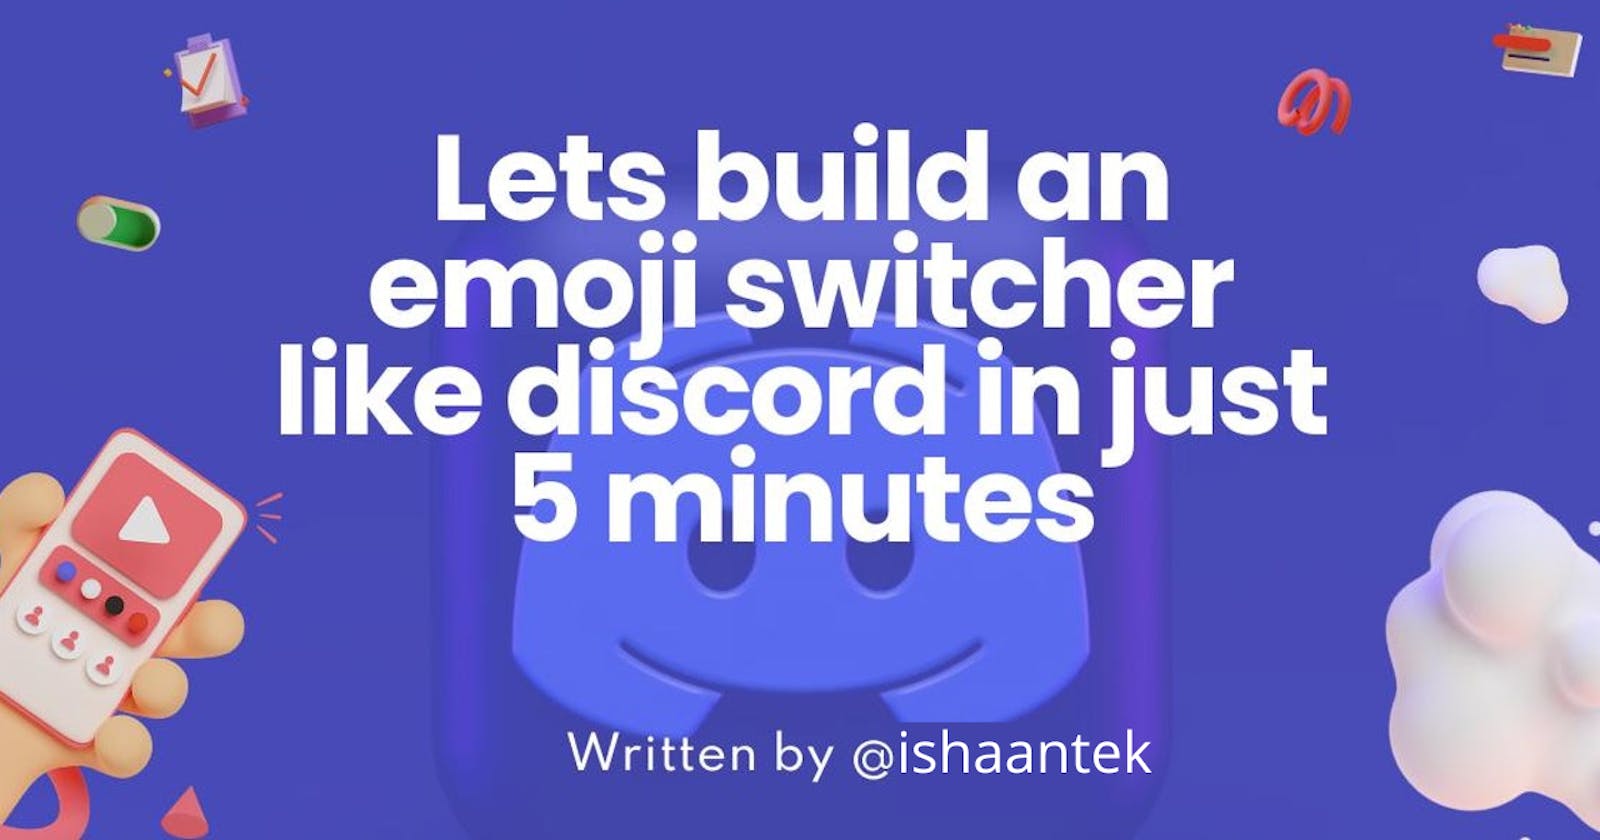 Let's build an emoji switcher like Discord in just 5 minutes